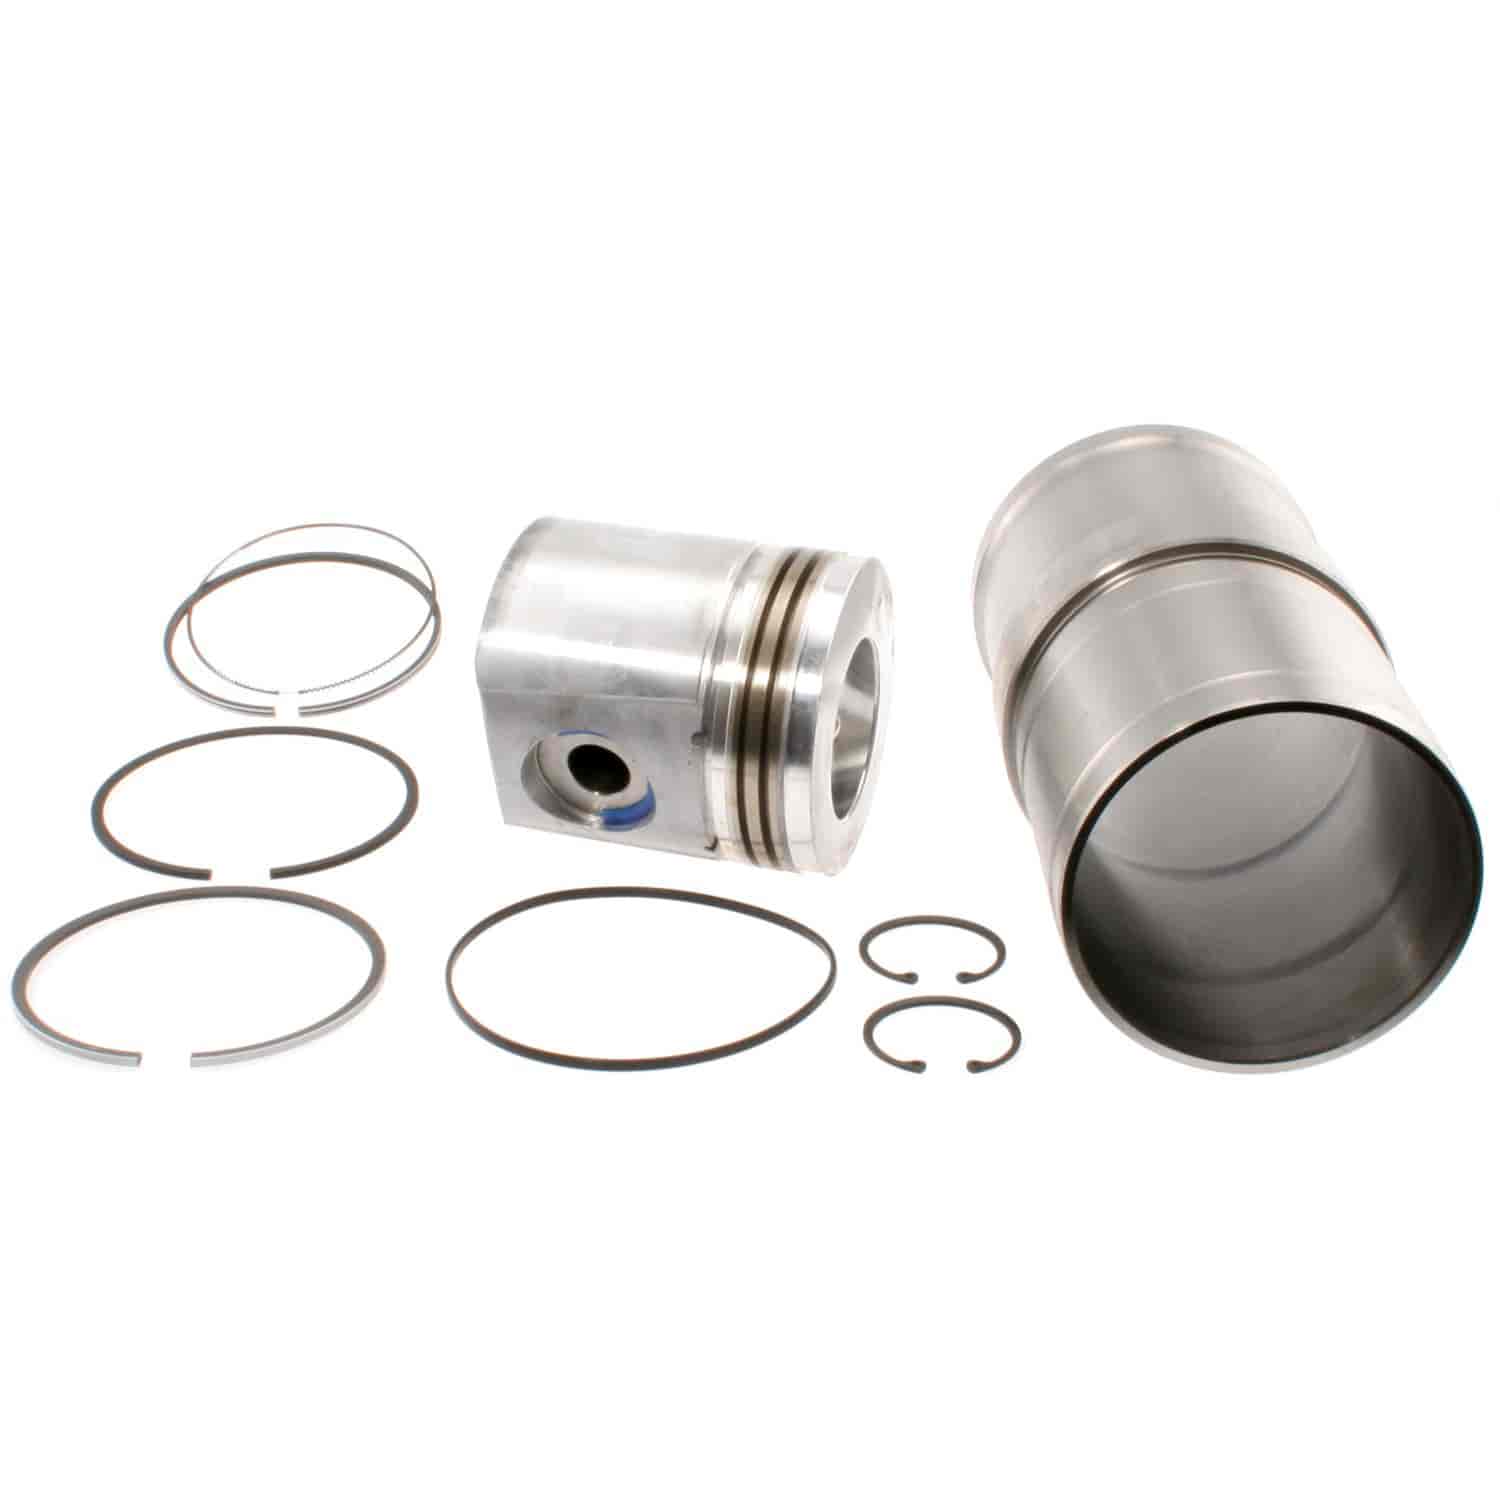 Cylinder Sleeve Assembly for Cummins C Series Diesel